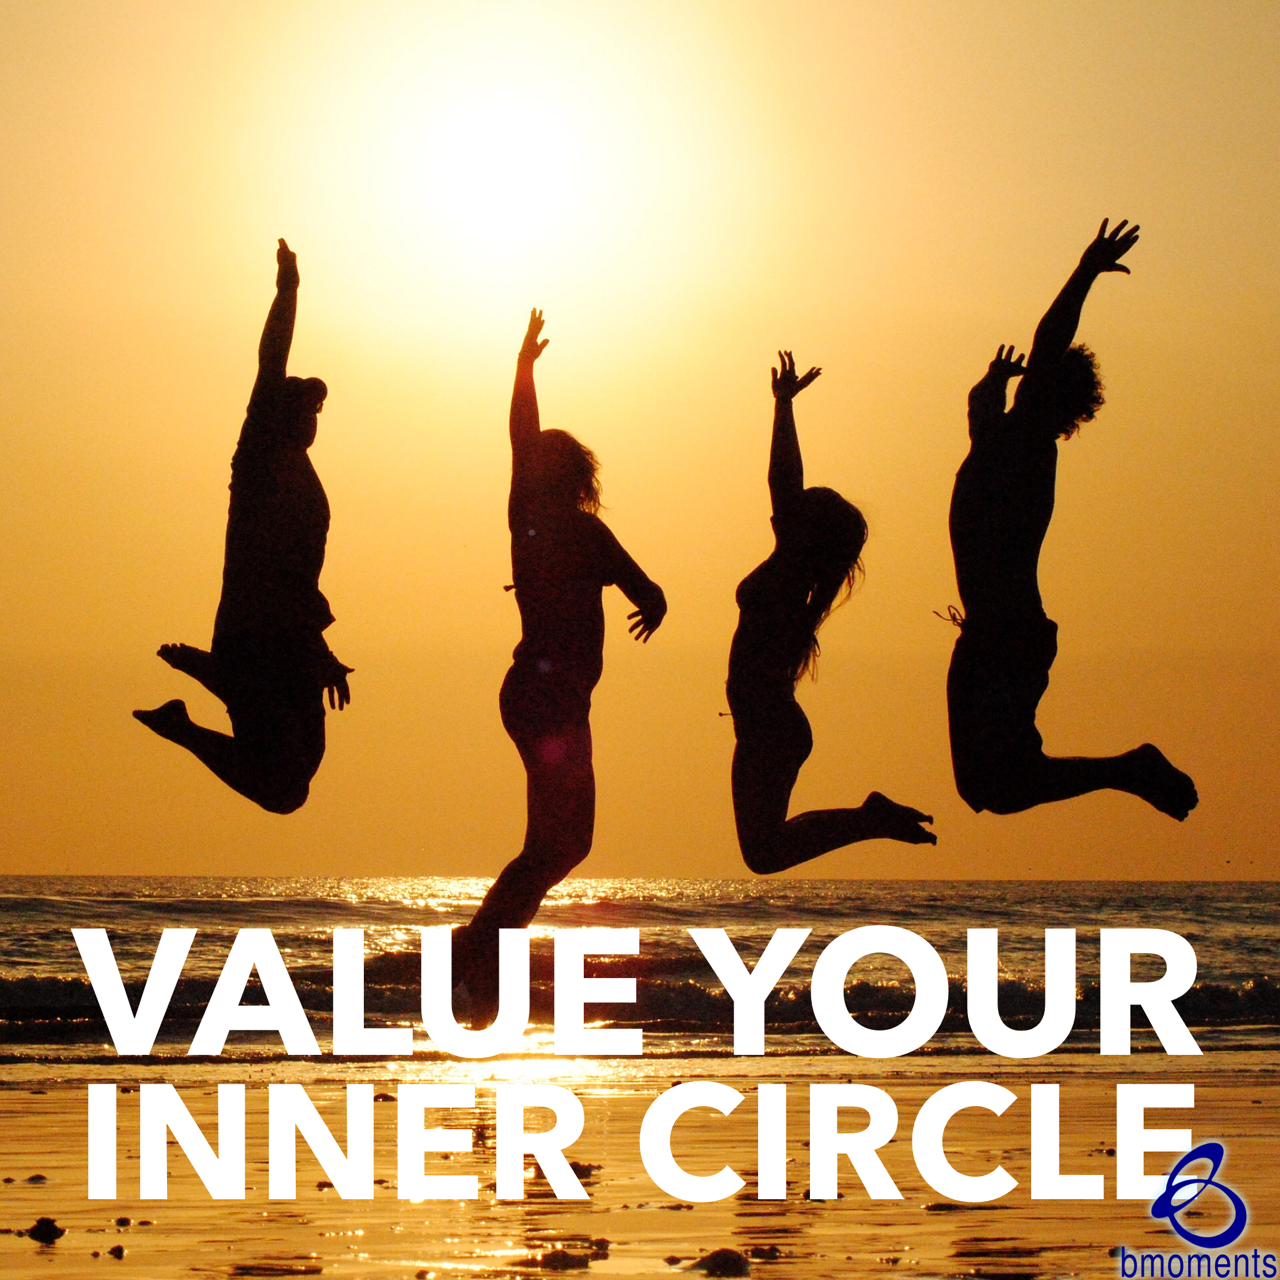 Do You Value Your Inner Circle?